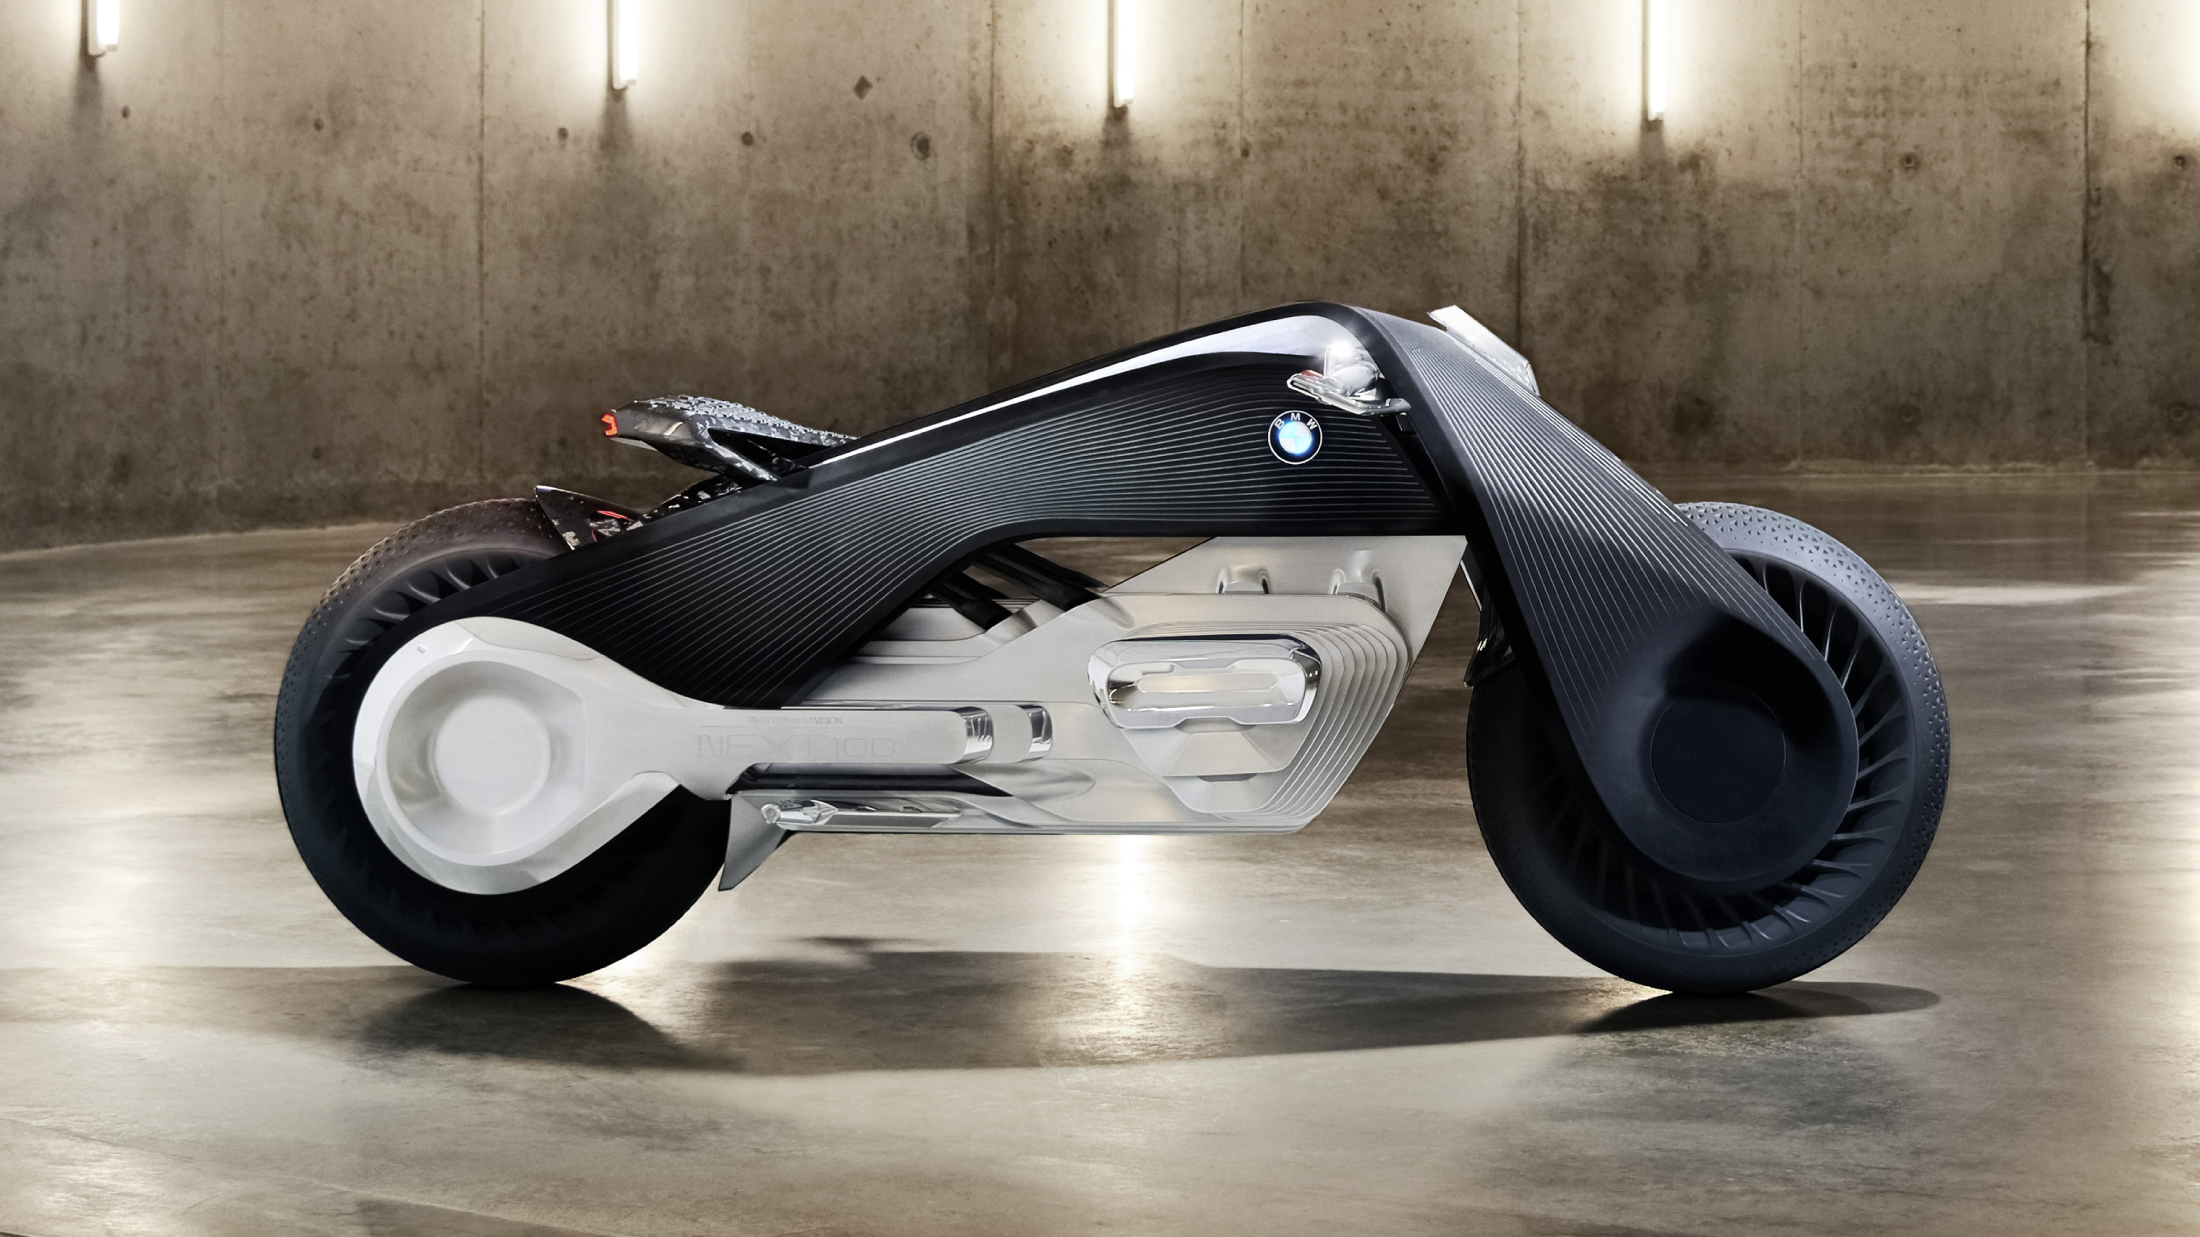 A side view of the self-balancing bike from BMW